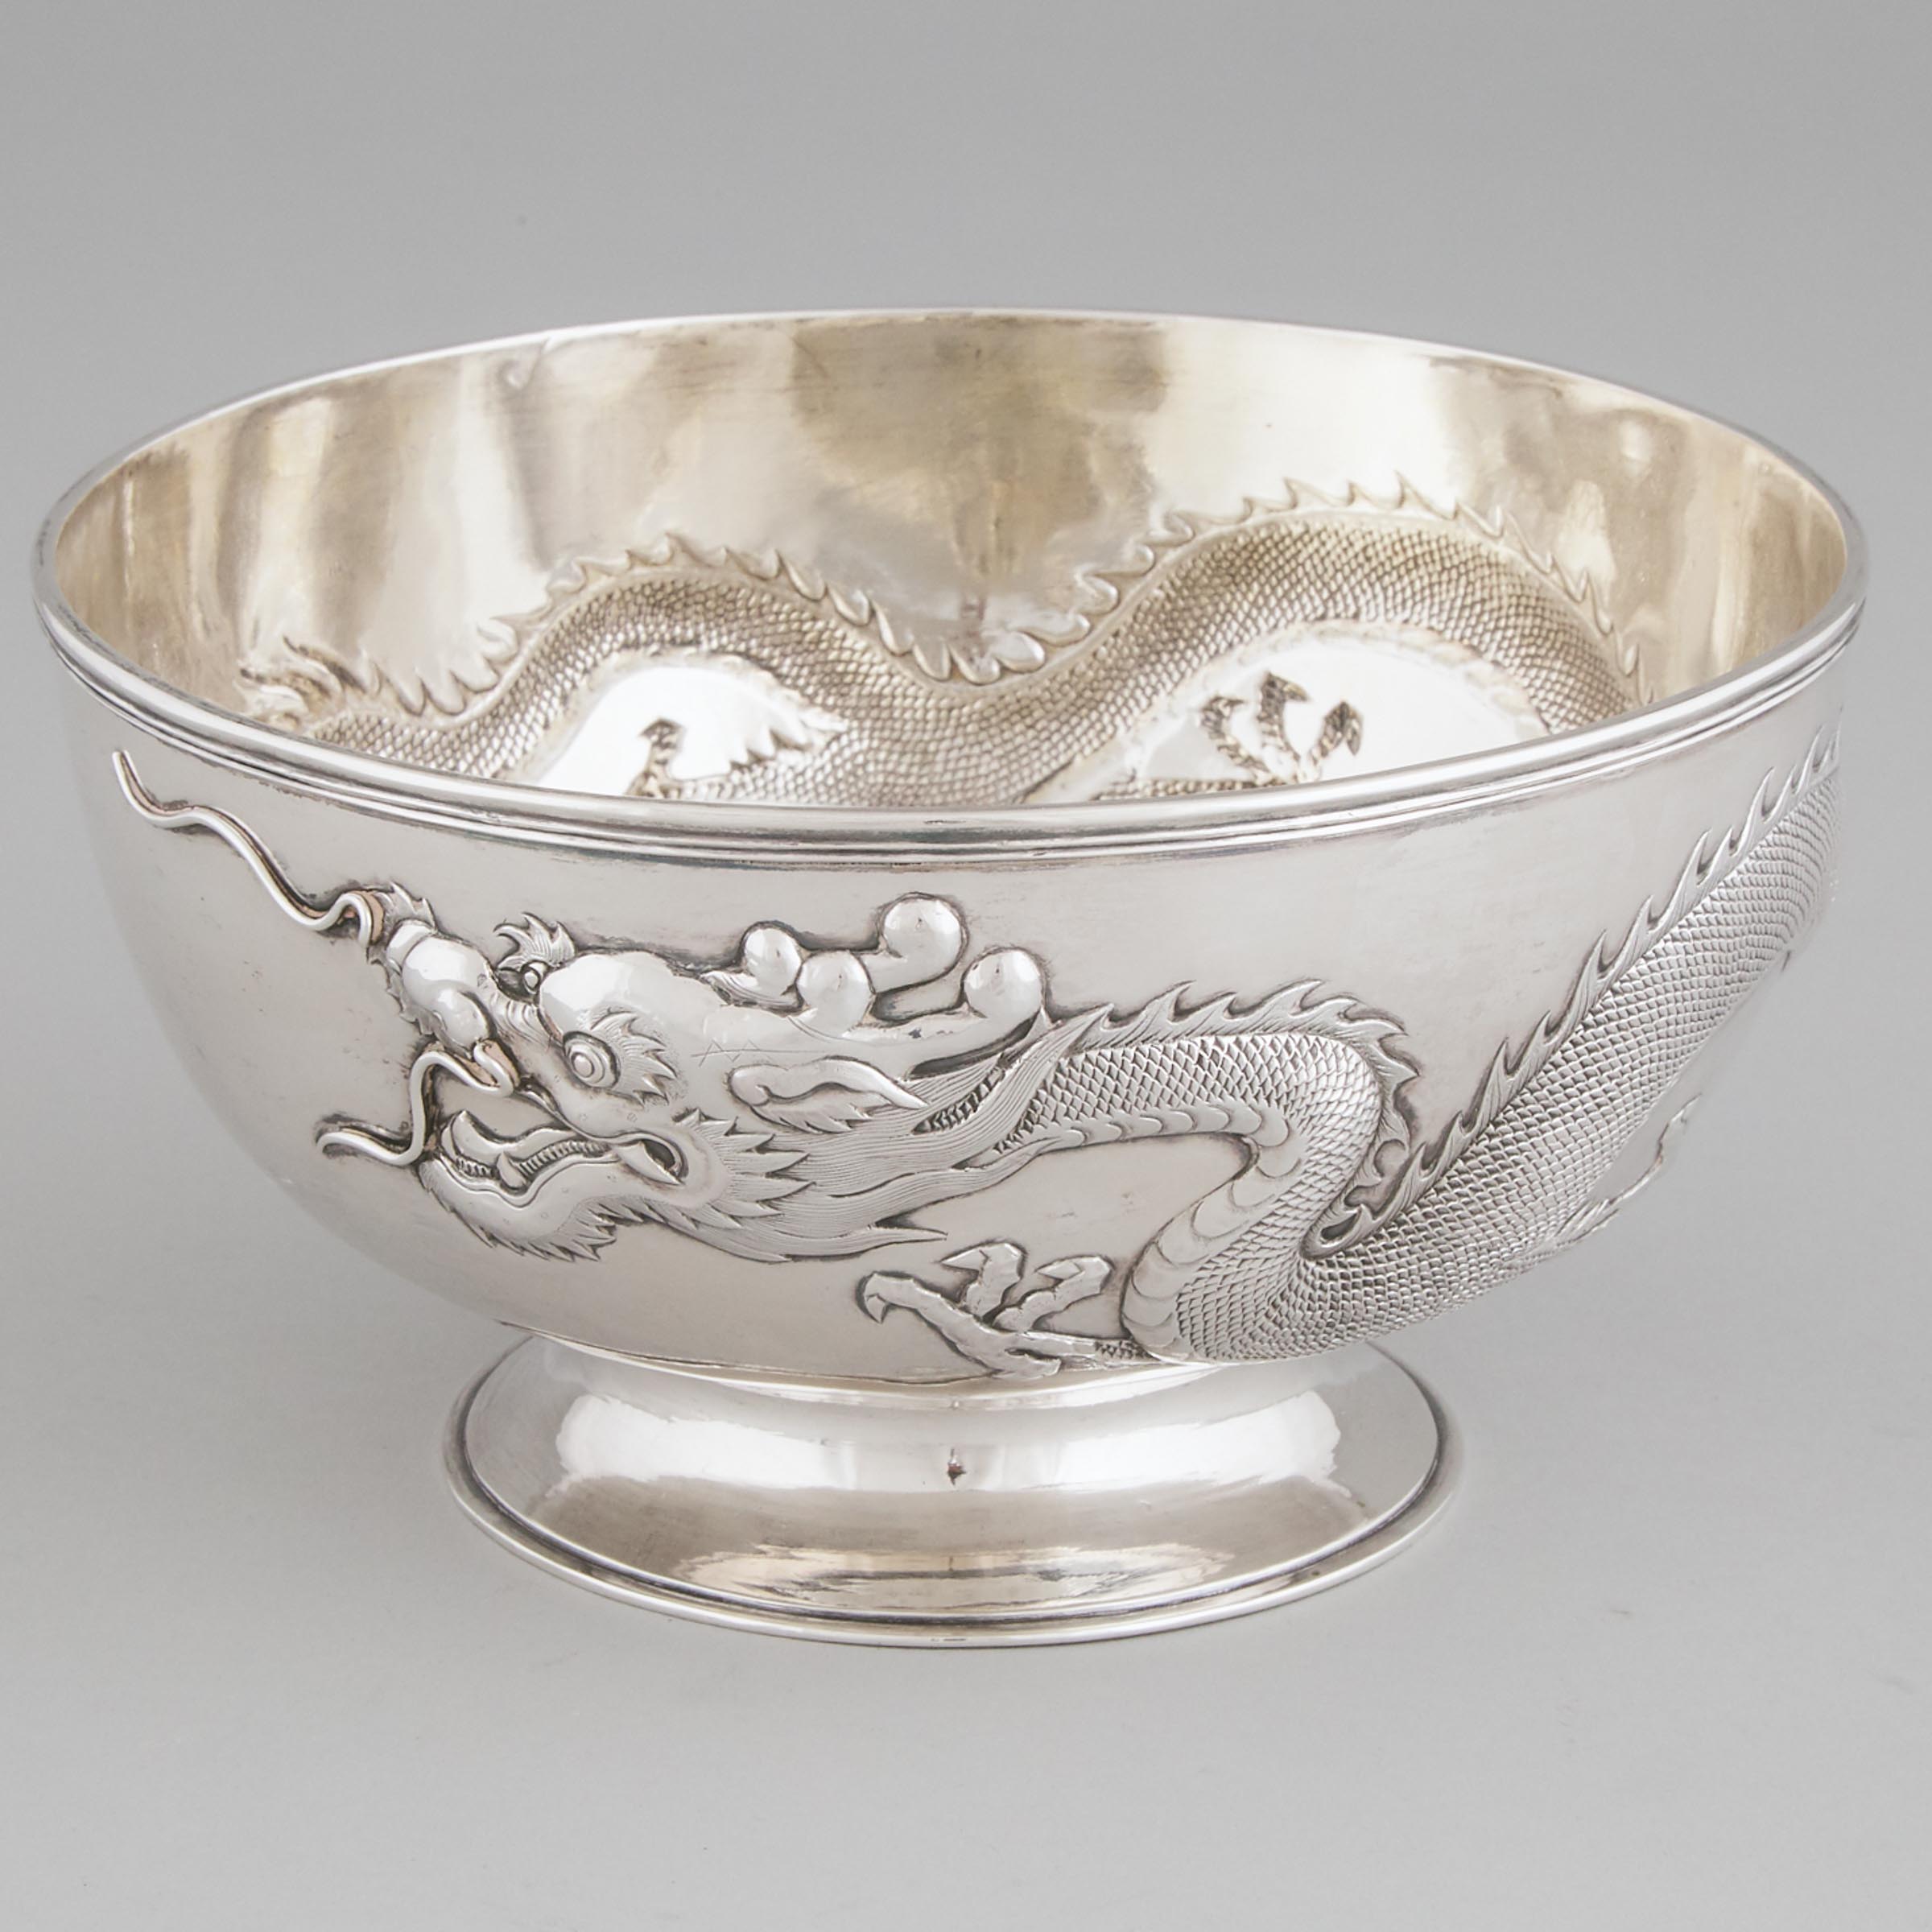 Chinese Export Silver Footed Bowl, Kwong